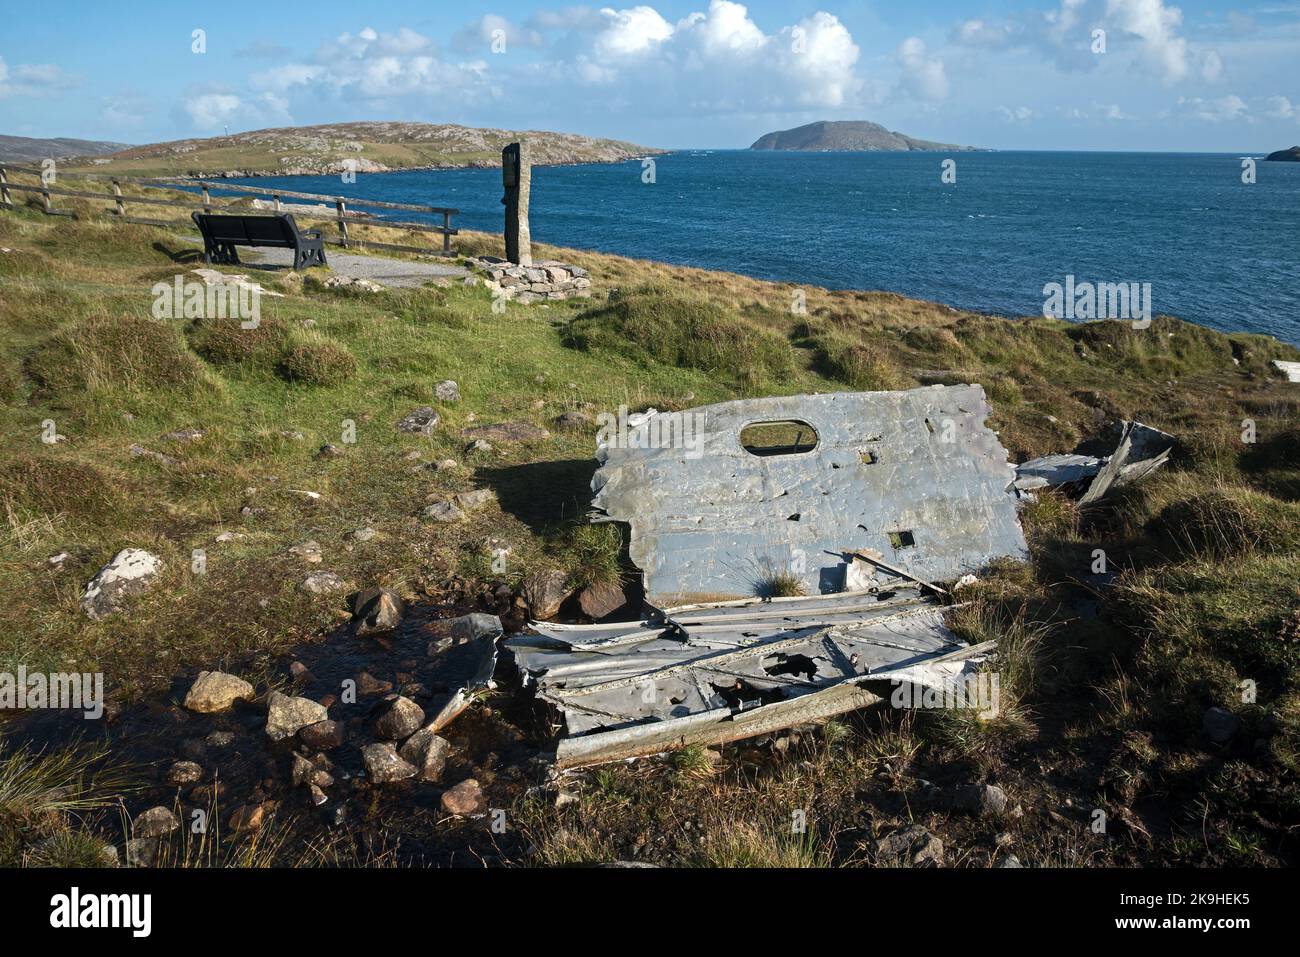 Wreckage of a Catalina flying boat which crashed on the island of Vatersay in 1944 during World War Two. Stock Photo